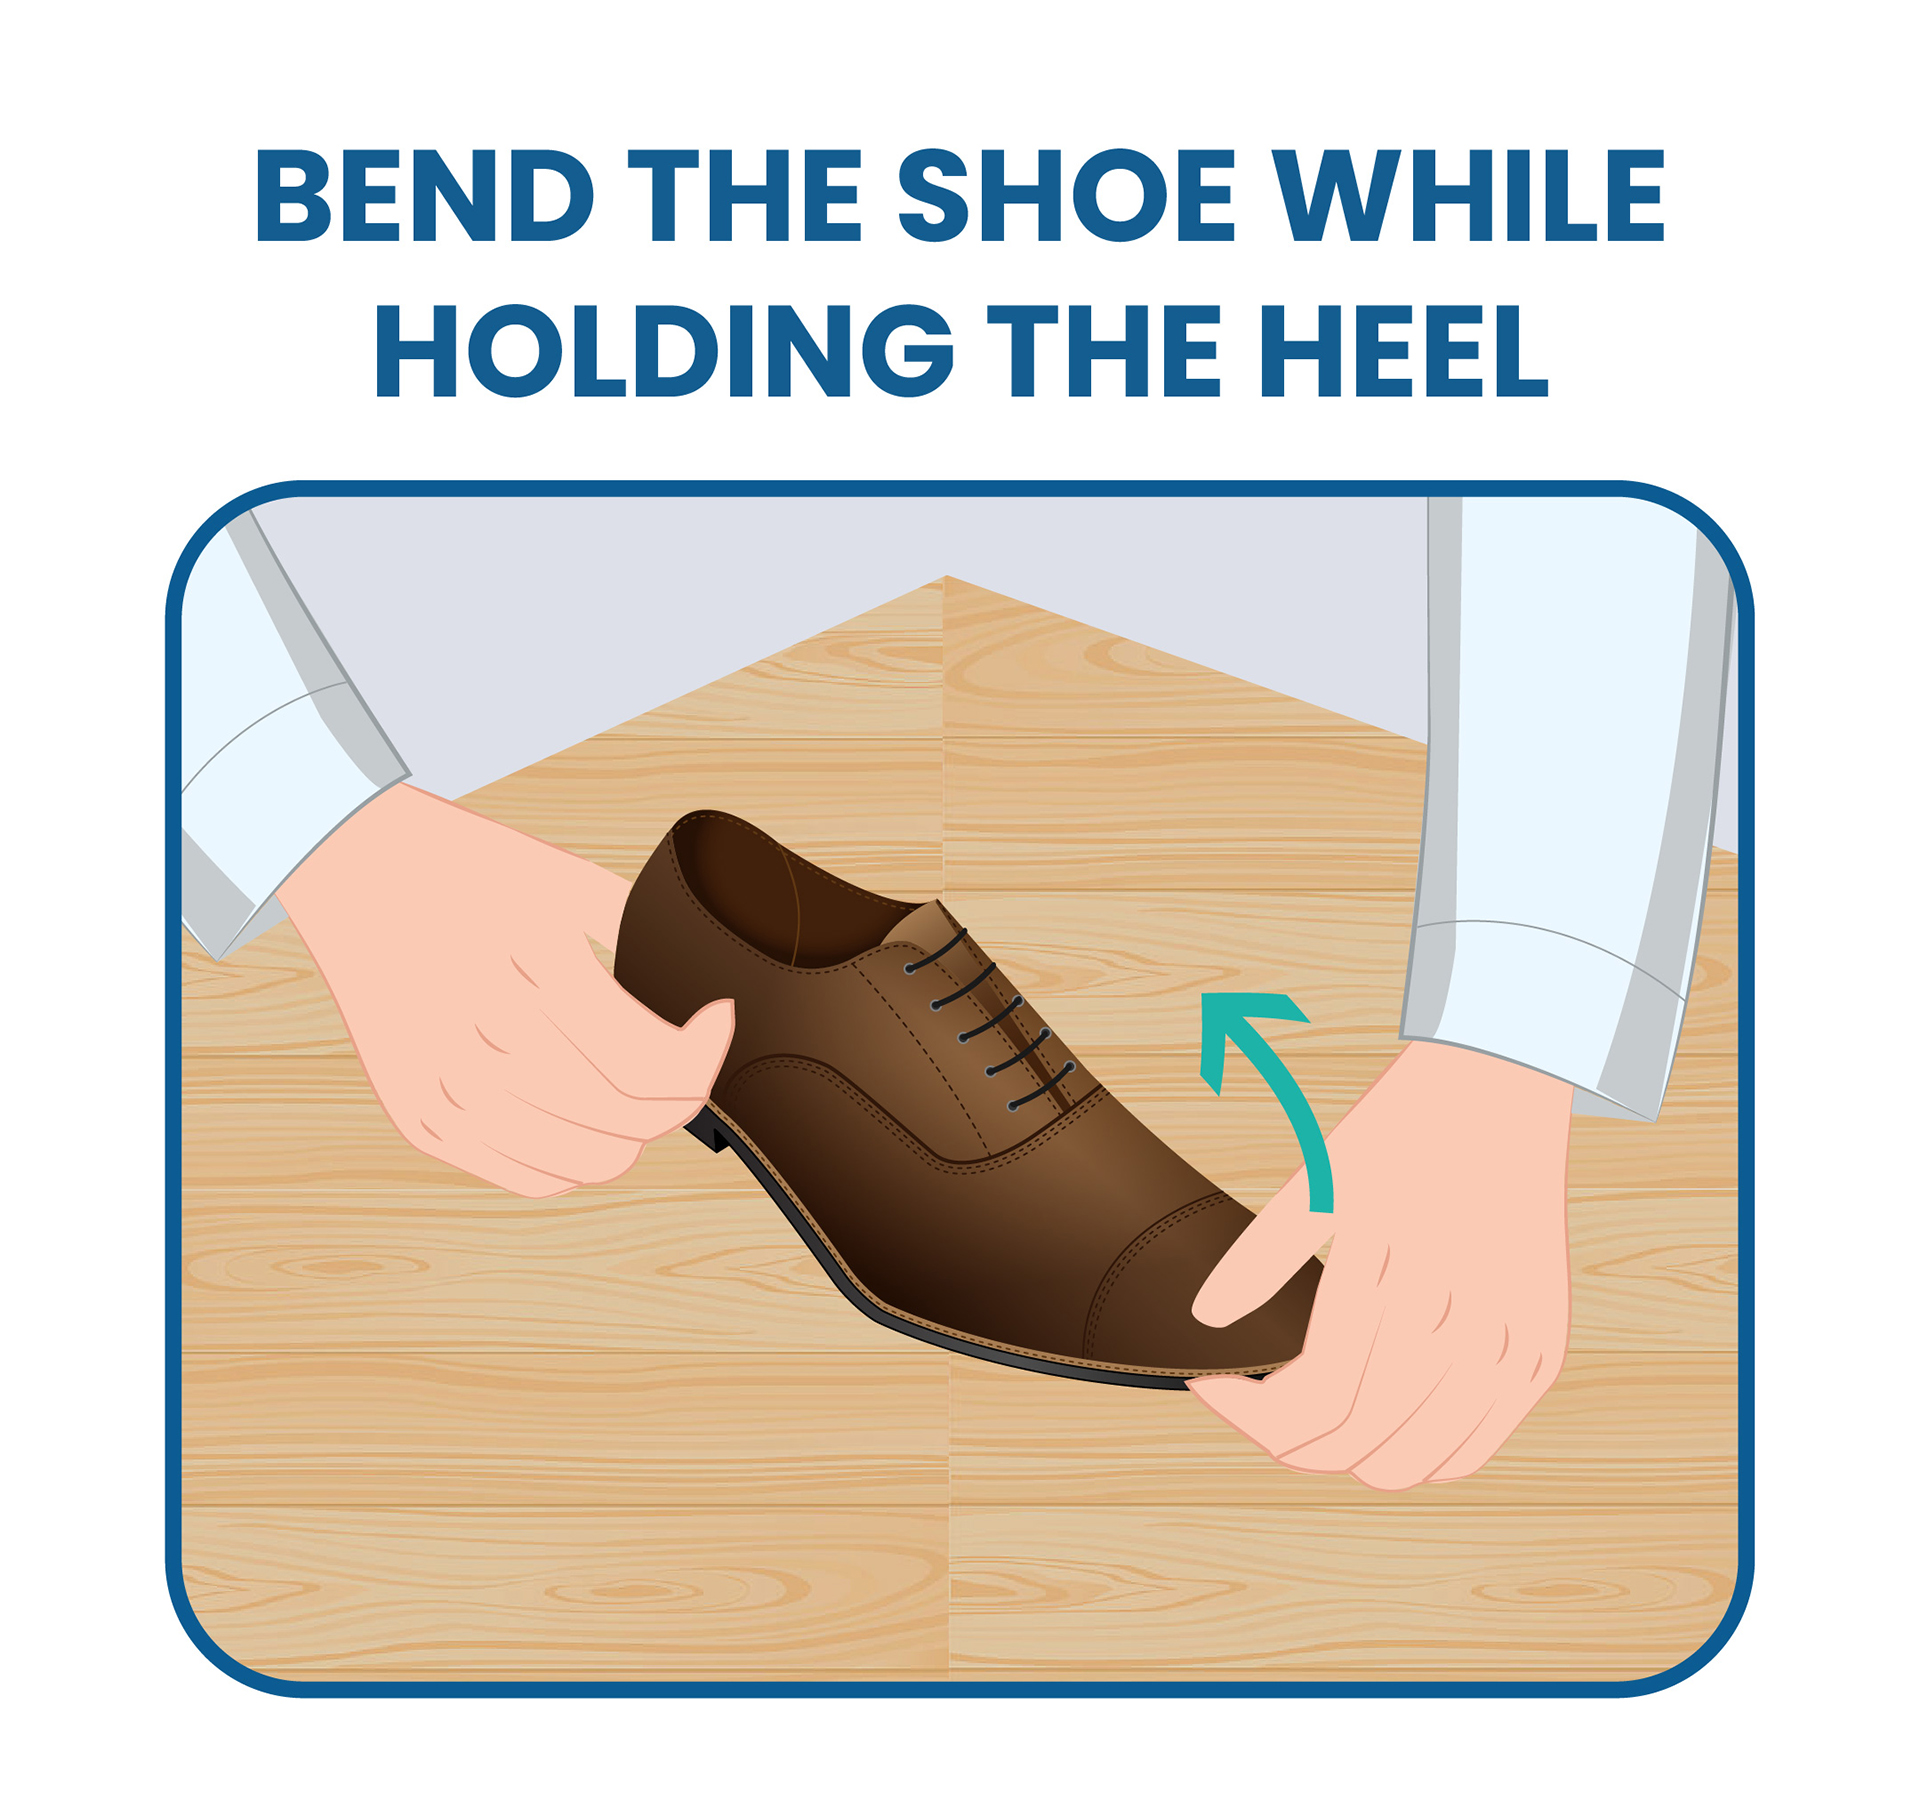 hold the heel with one hand and bend the shoe with the other